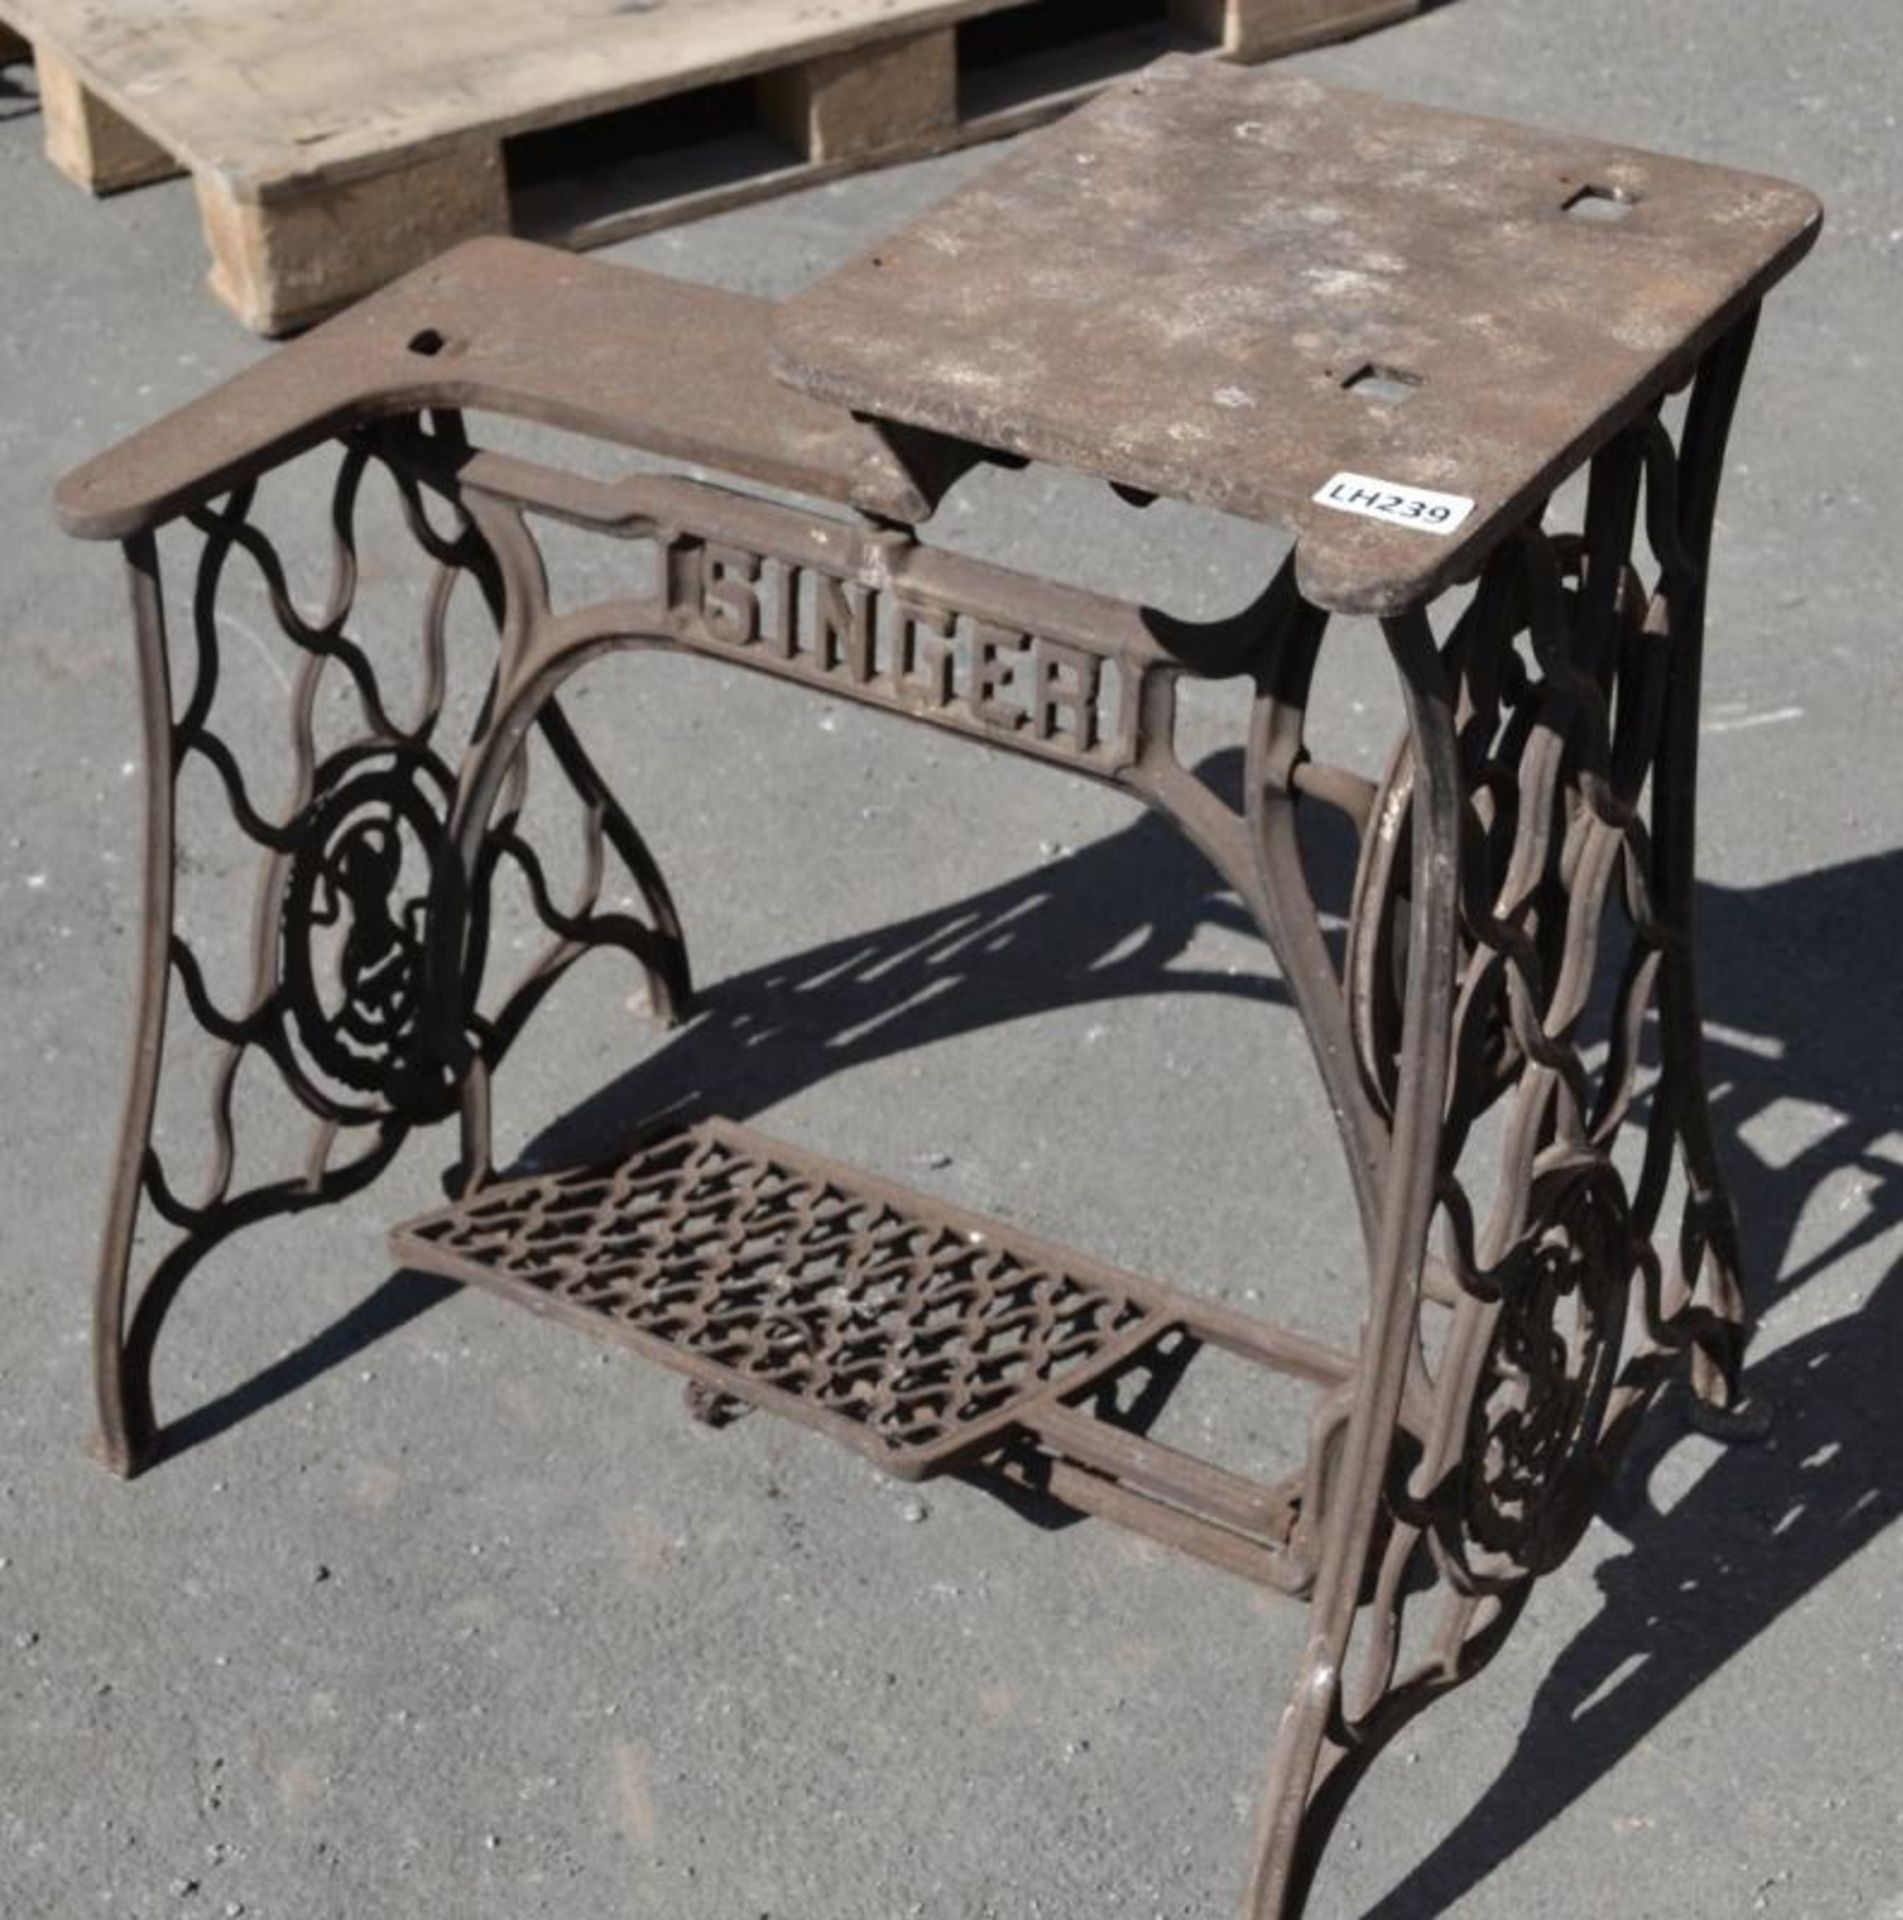 1 x Antique SINGER Cast Iron Sewing Machine Treadle Base - Good Display Piece, Recently Removed From